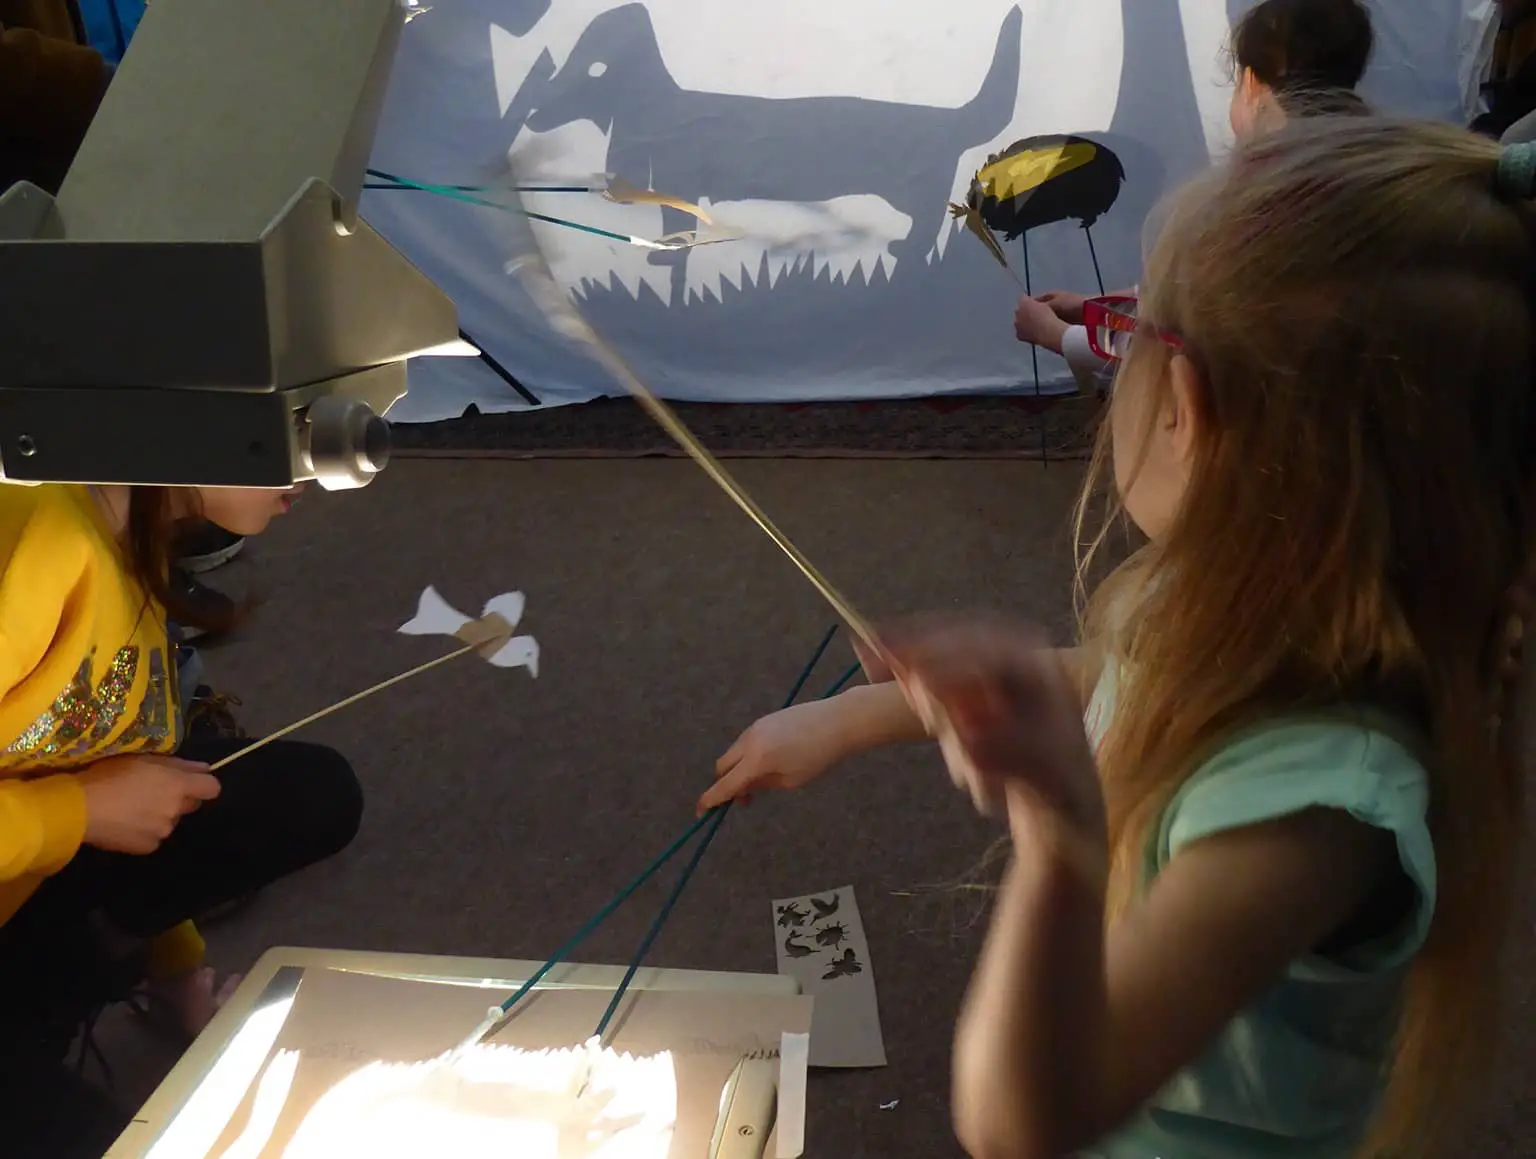 Children taking part in a shadow puppet workshop in February 2020